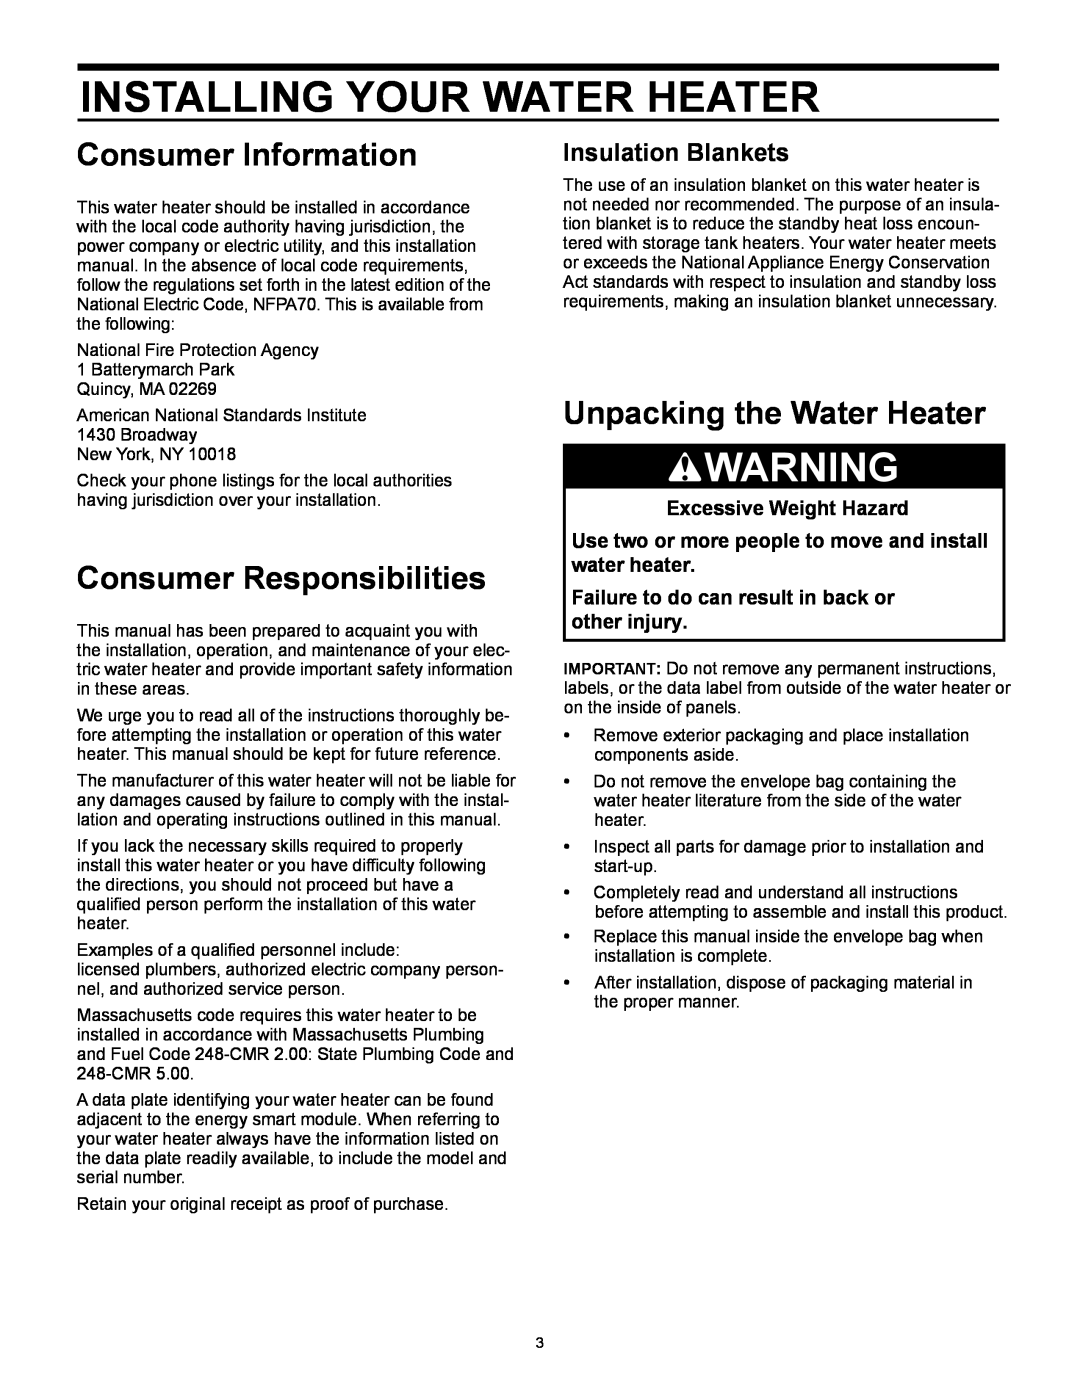 Whirlpool 318686-000 Installing Your Water Heater, Consumer Information, Consumer Responsibilities, Insulation Blankets 